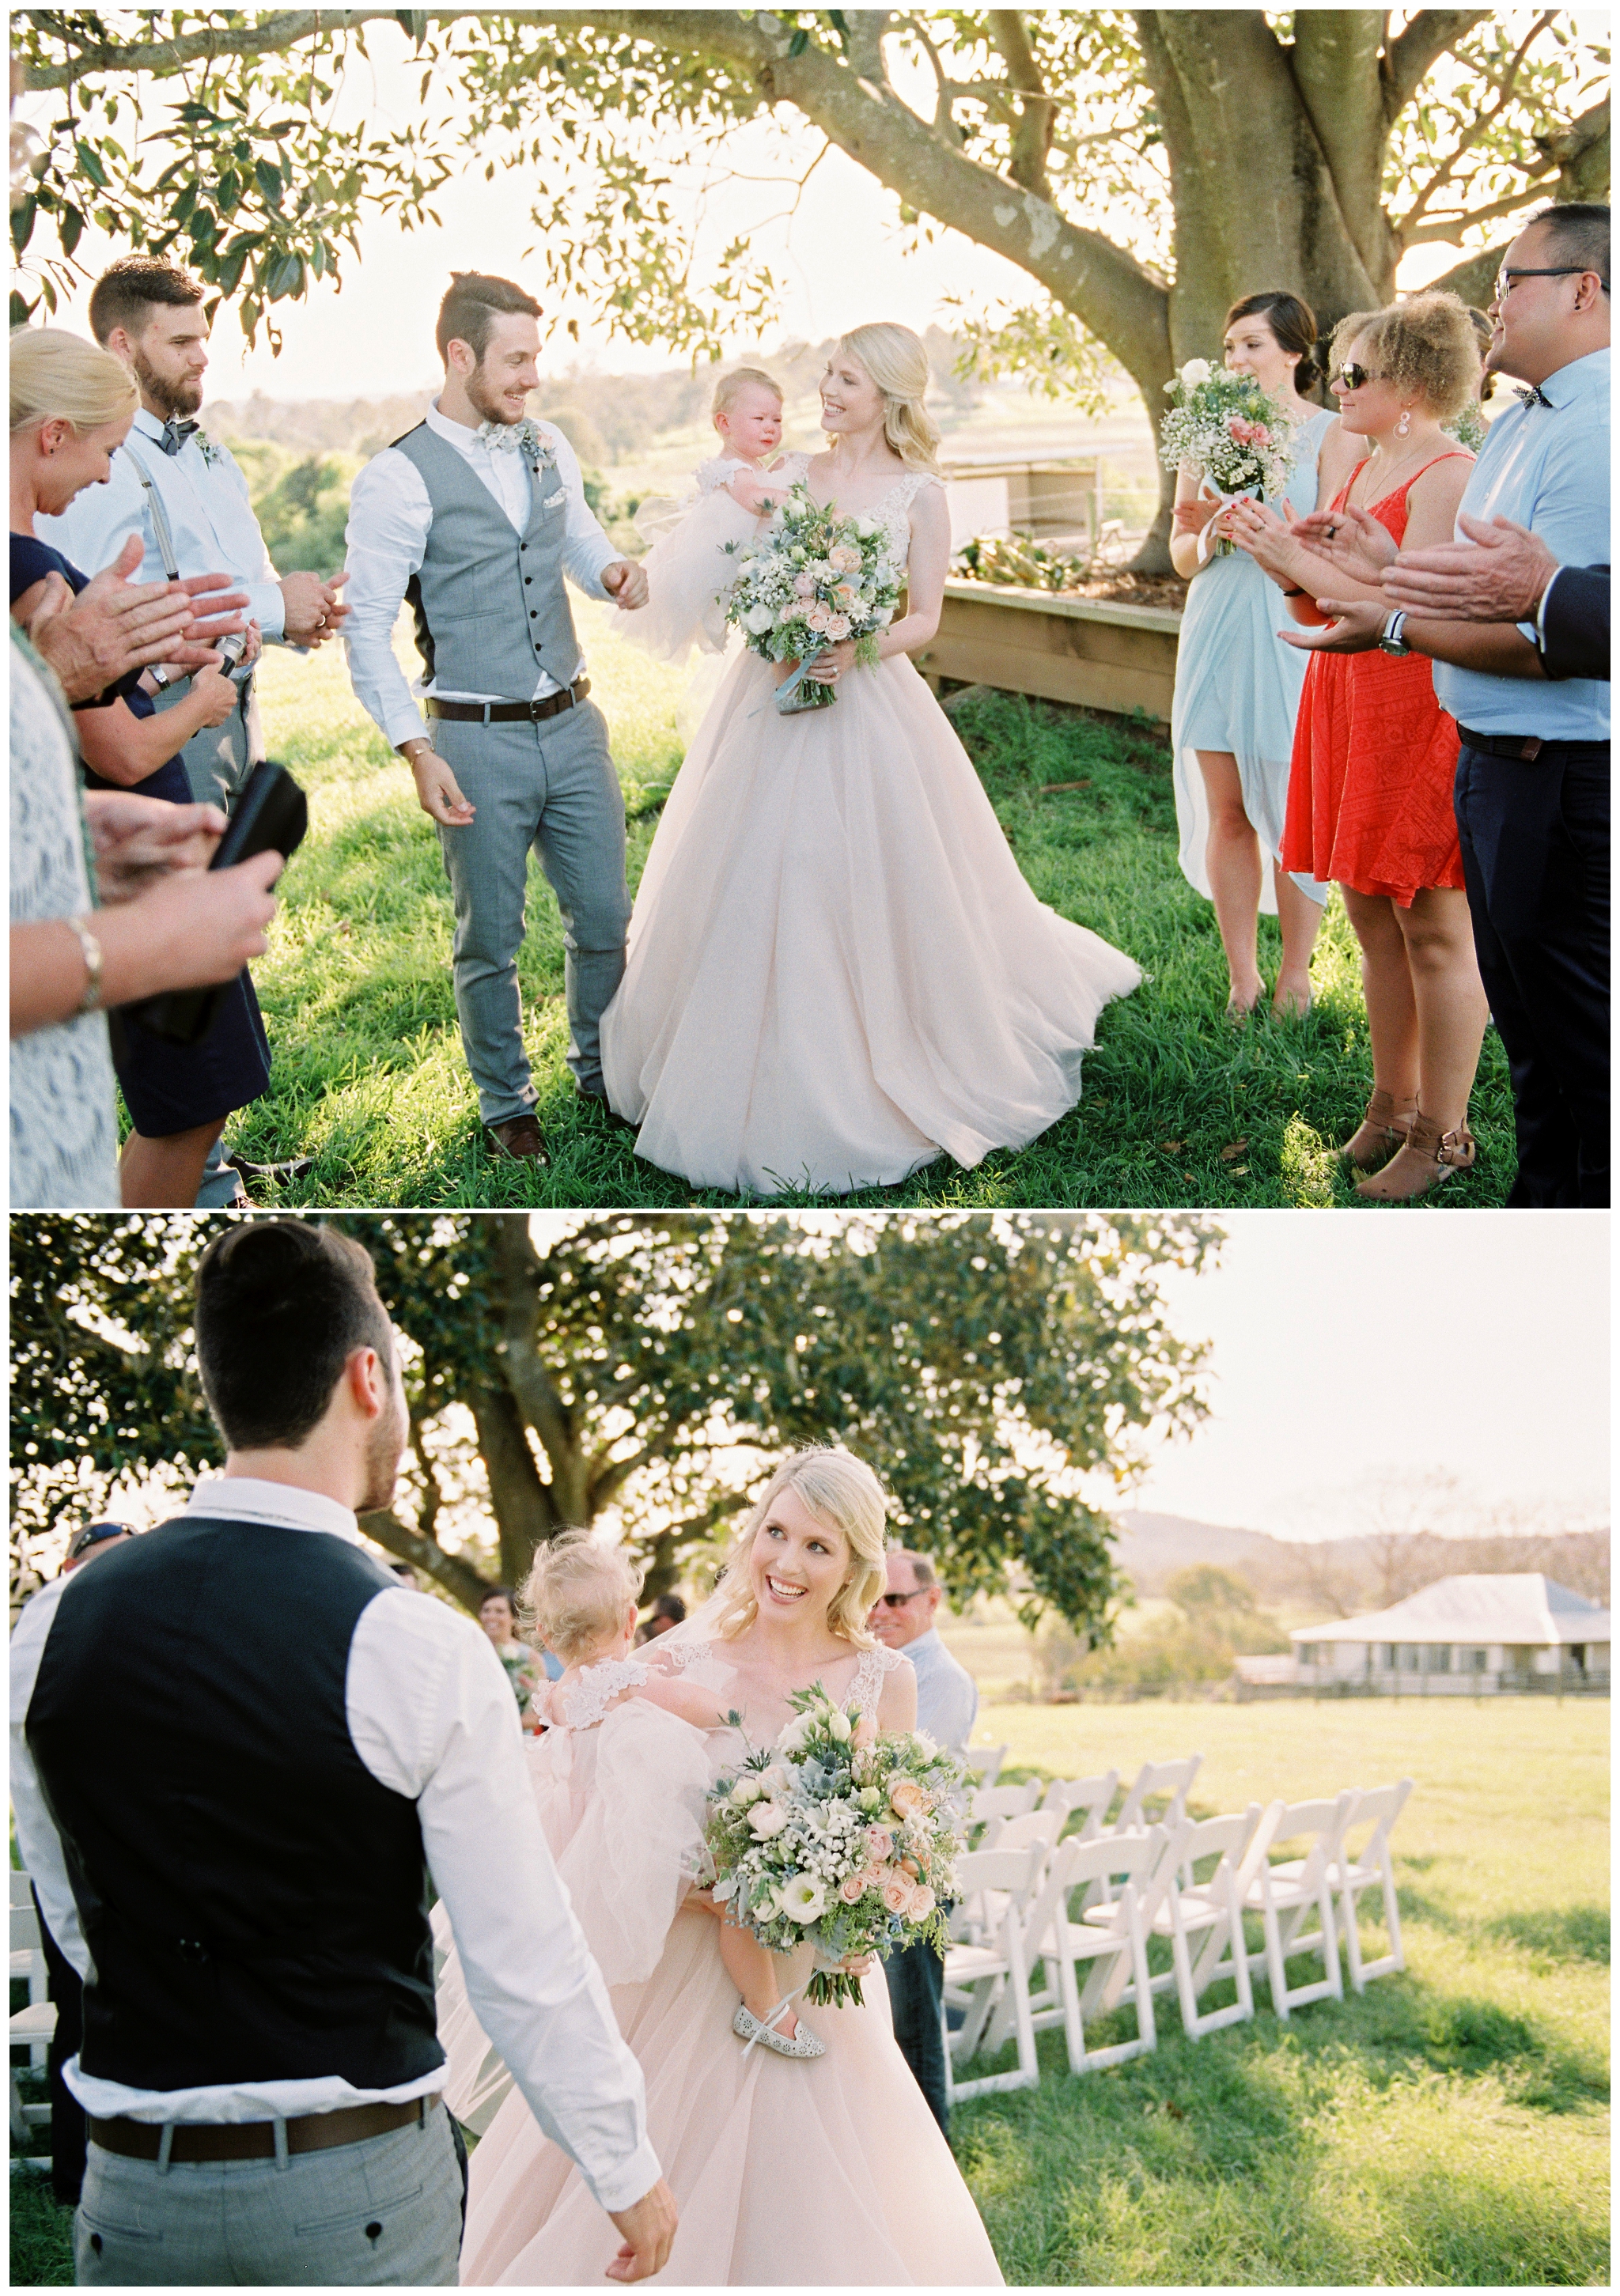 Tegan and Alex Wedding at Albert River Wines by Casey Jane Photography 44